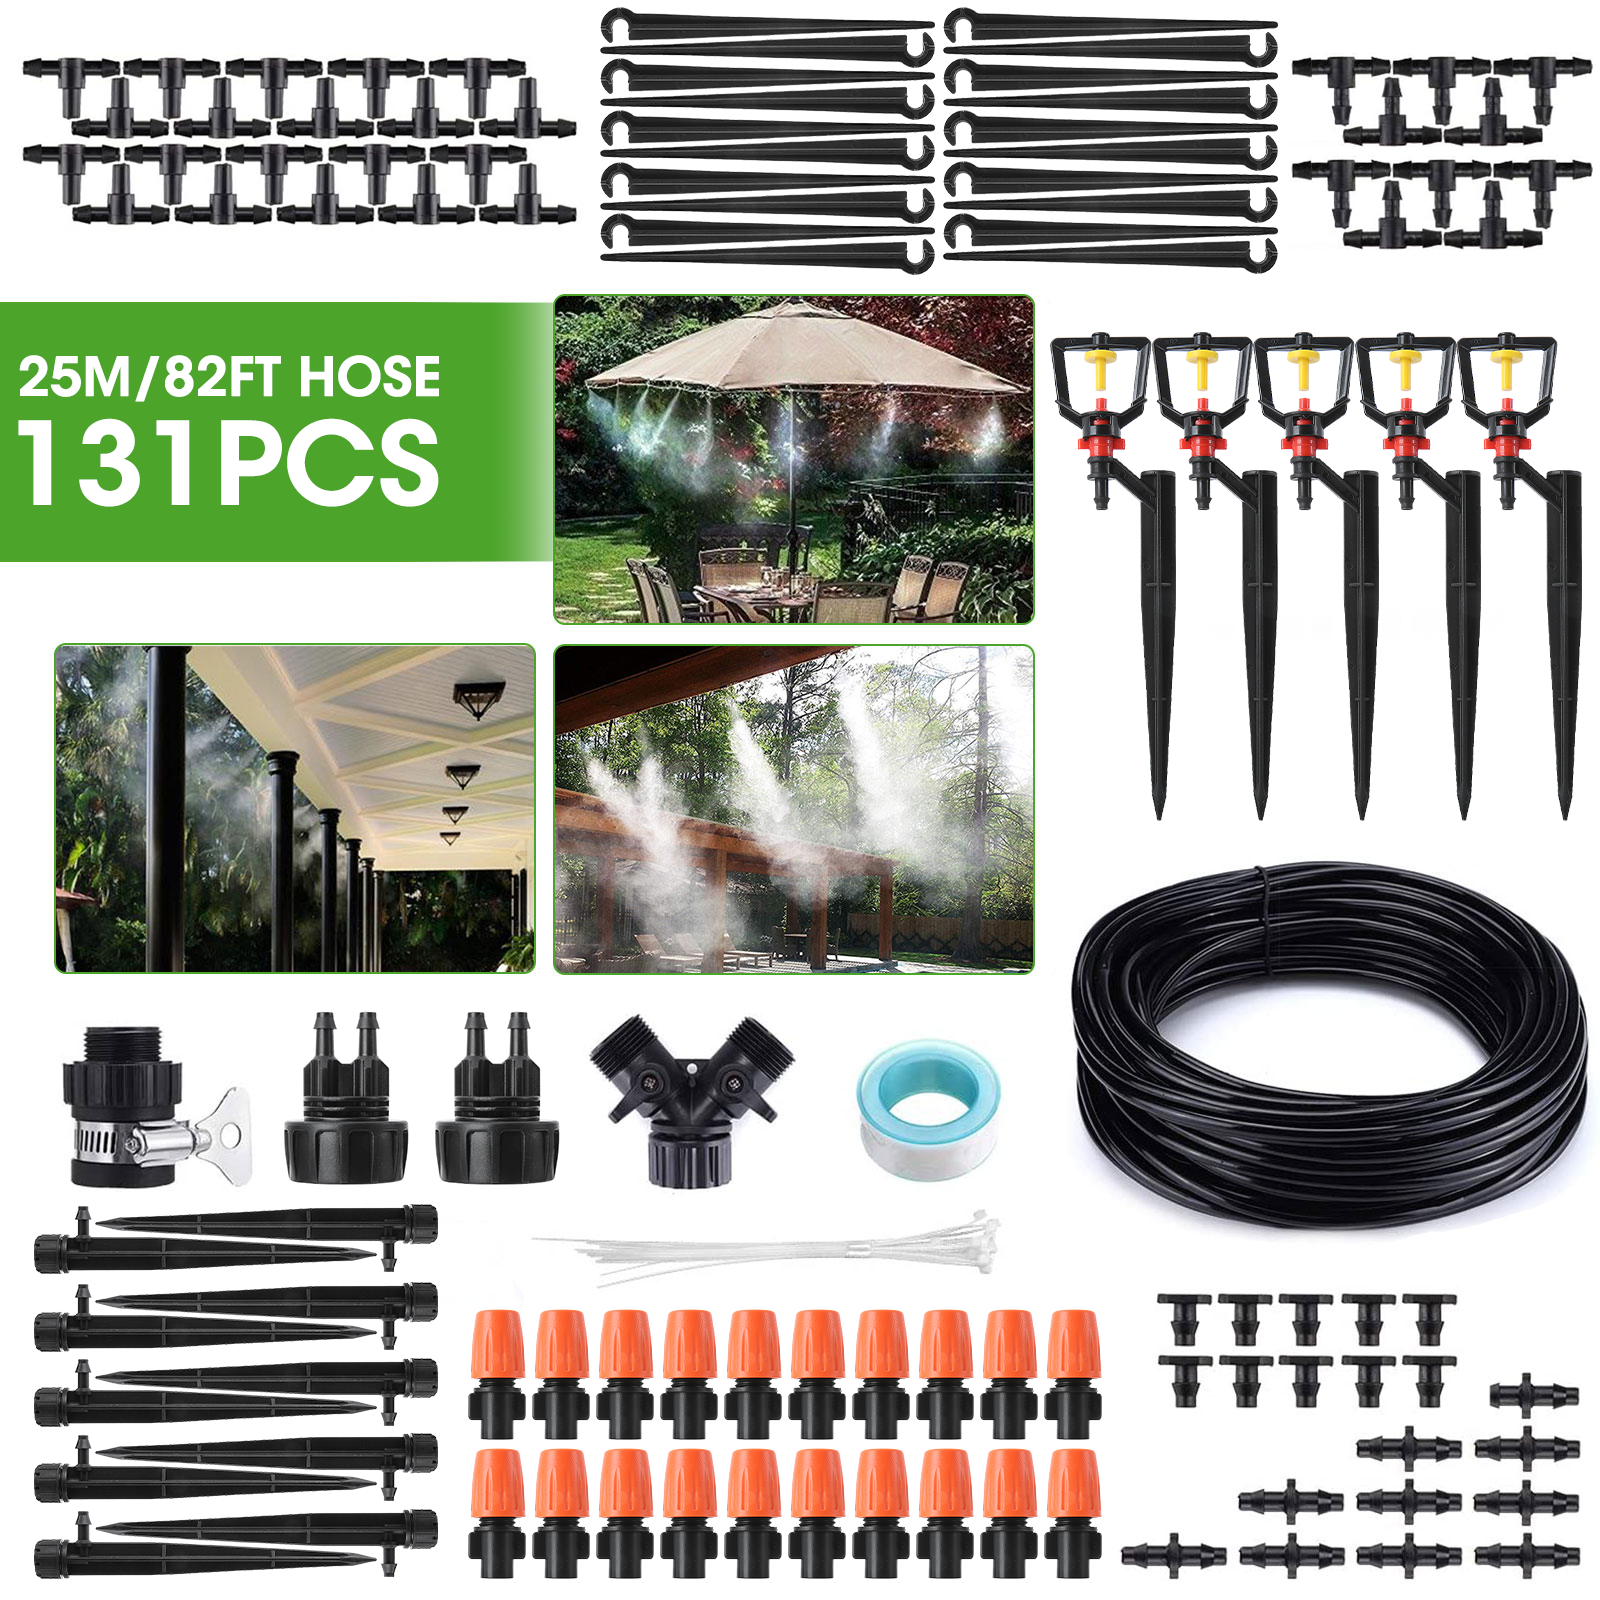 OUTERDO 25M 131PCS Automatic Sprinkler DIY Garden Watering Micro Drip Irrigation System Hose Kits